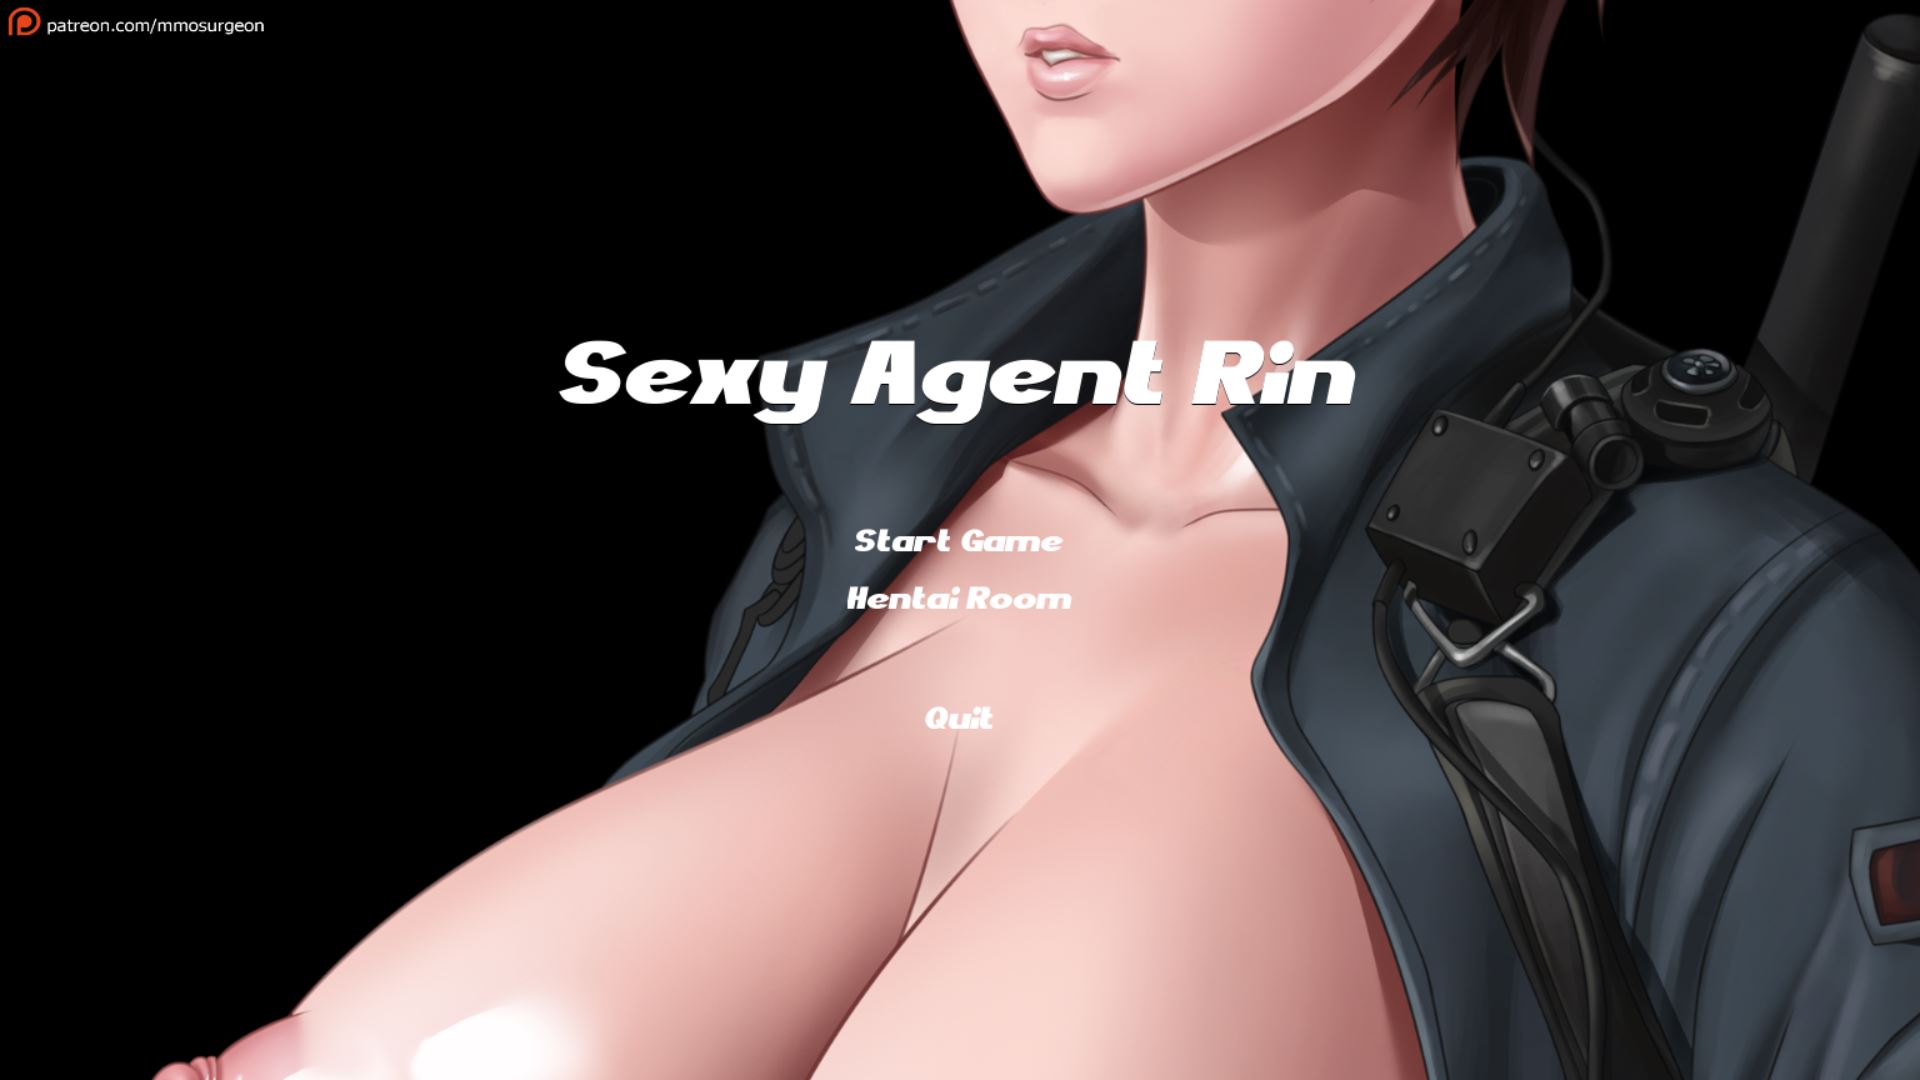 Adult Hentai Mmorpg - Unreal Engine] Hentai Shooter: Sexy Agent Rin - vFinal by MMO Surgeon 18+  Adult xxx Porn Game Download